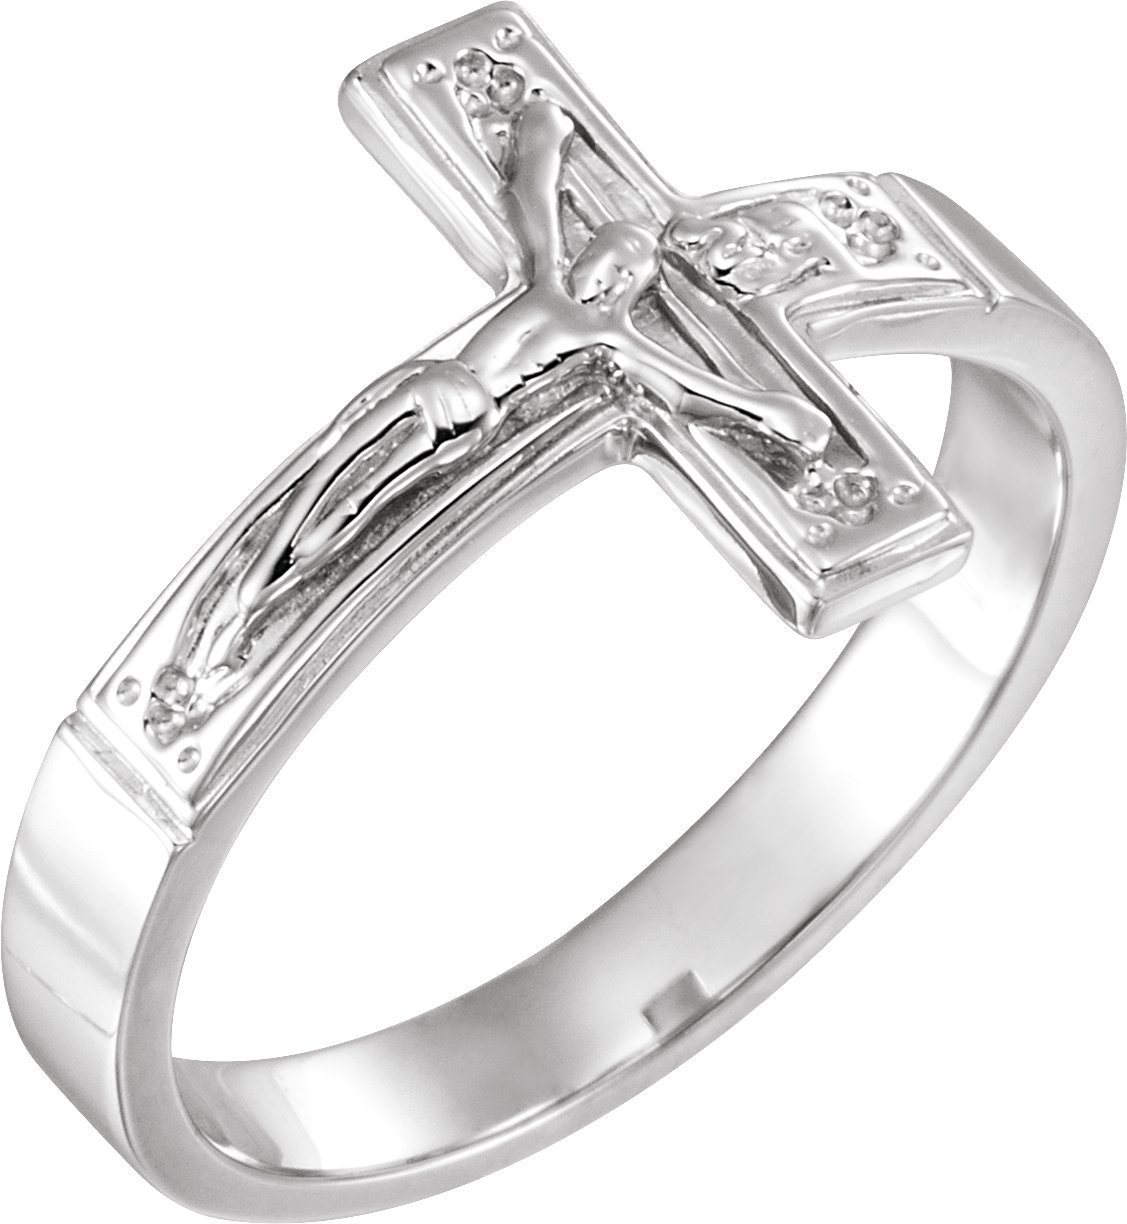 Sterling Silver 12 mm Crucifix Chastity Ring Size 6